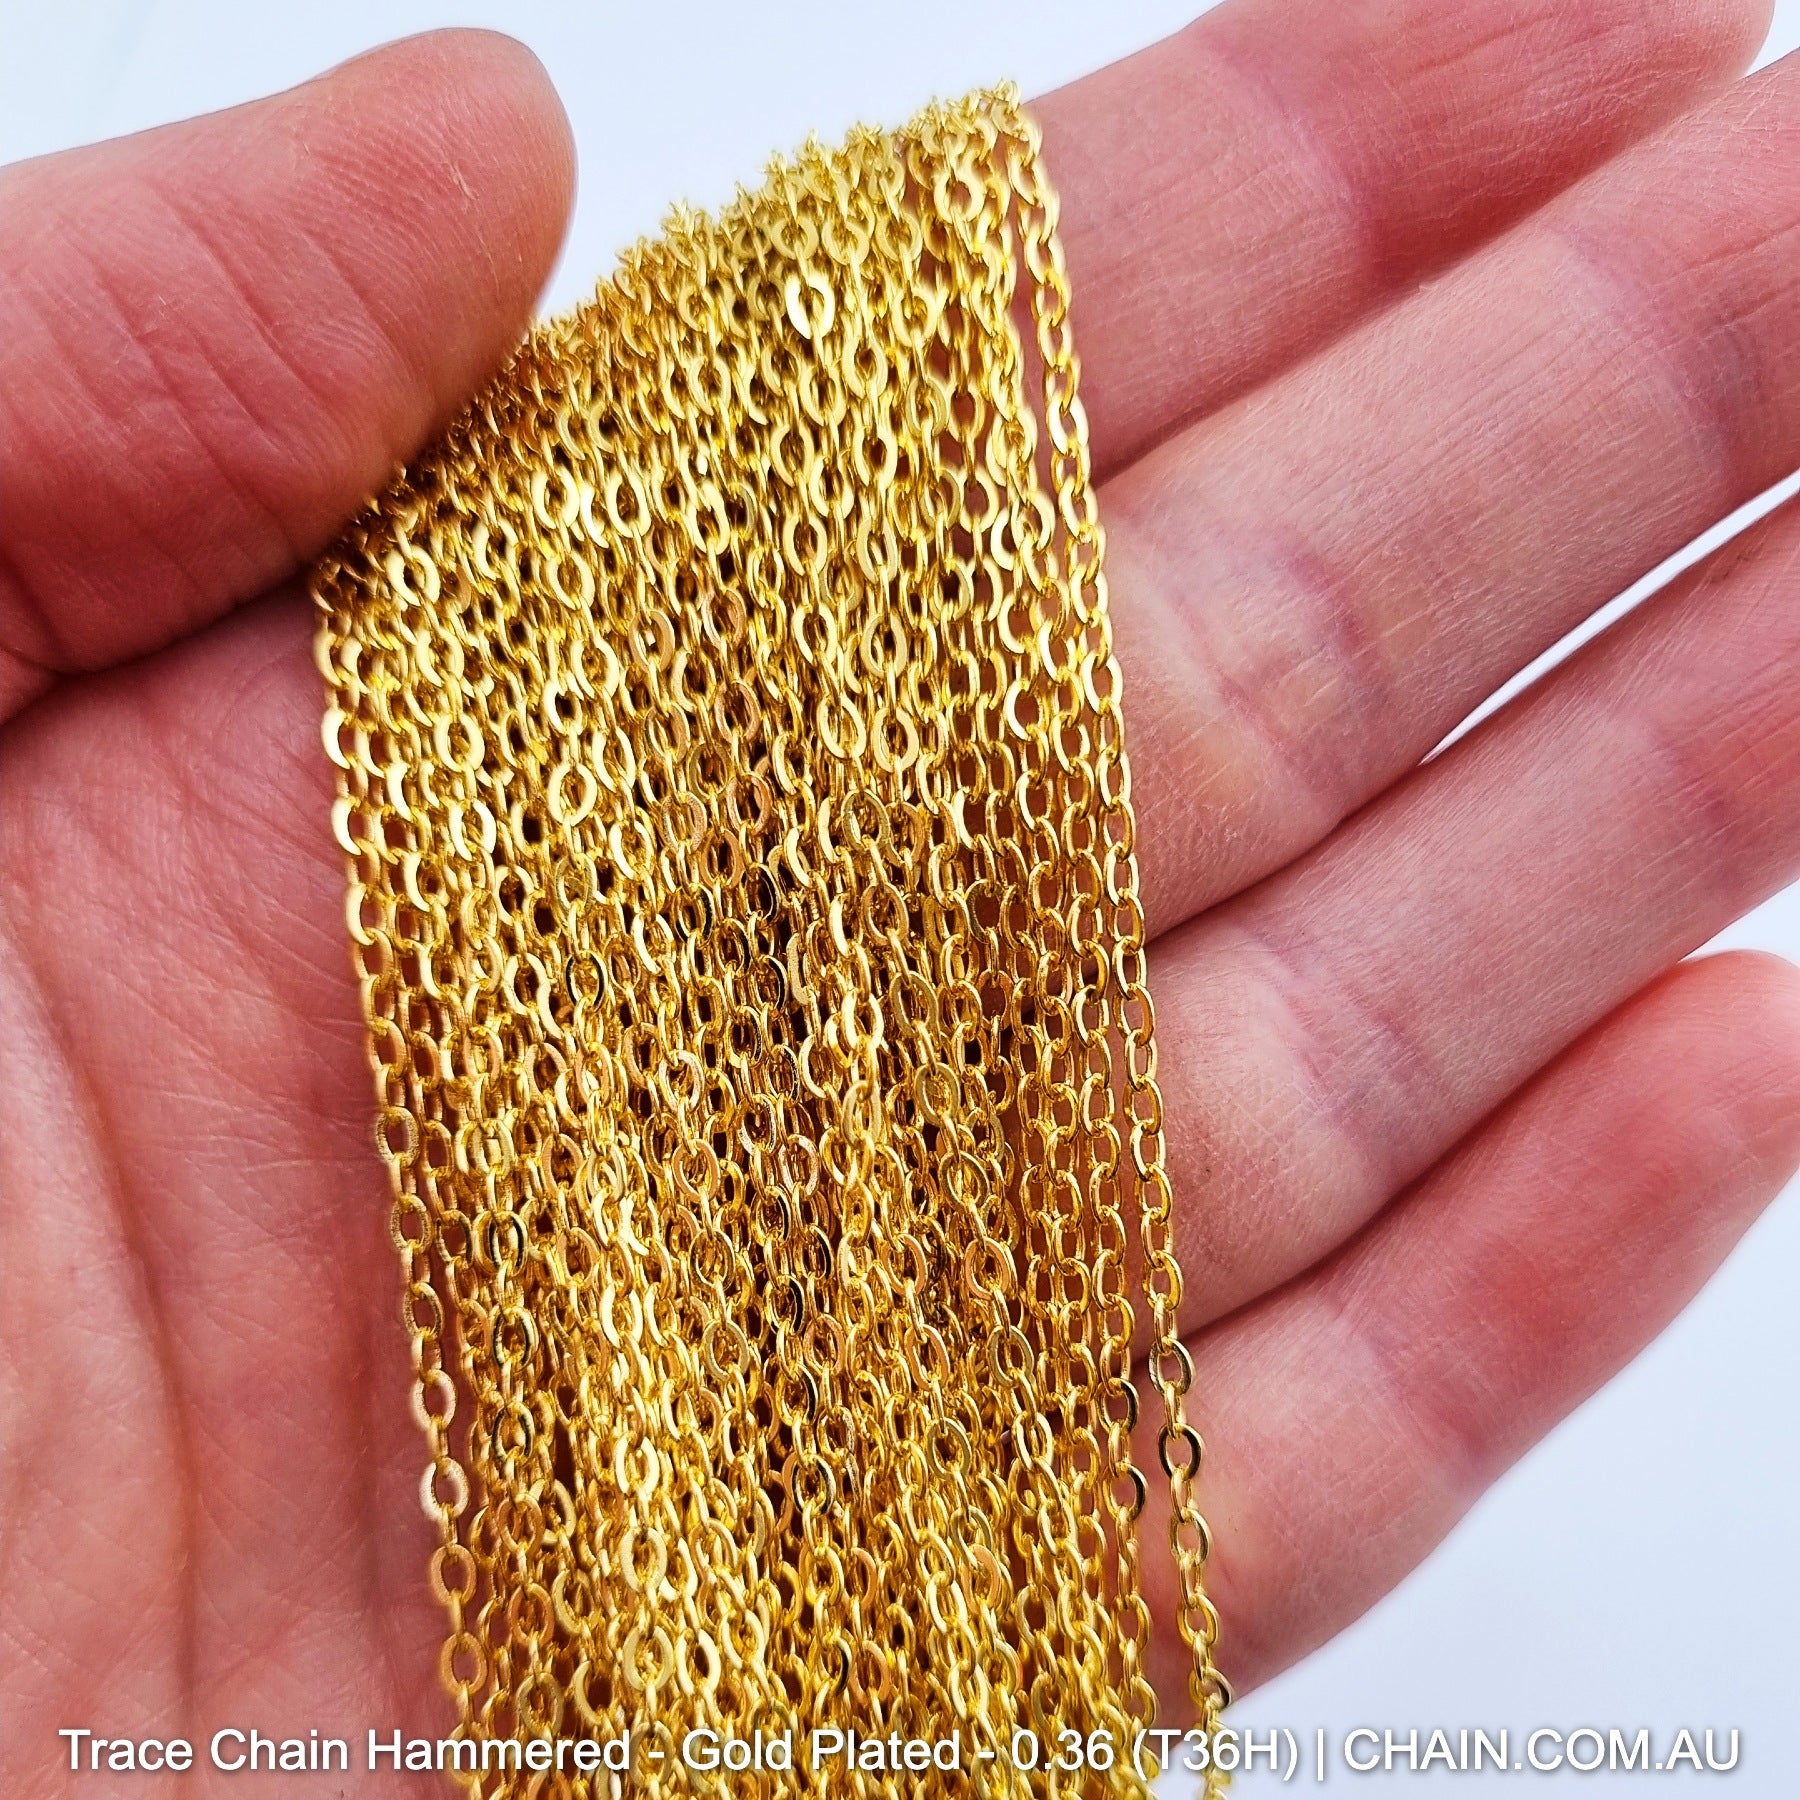 Hammered Trace Chain in a Gold Plated Finish. Size: 0.36mm, T36H. Jewellery Chain, Australia wide shipping. Shop chain.com.au